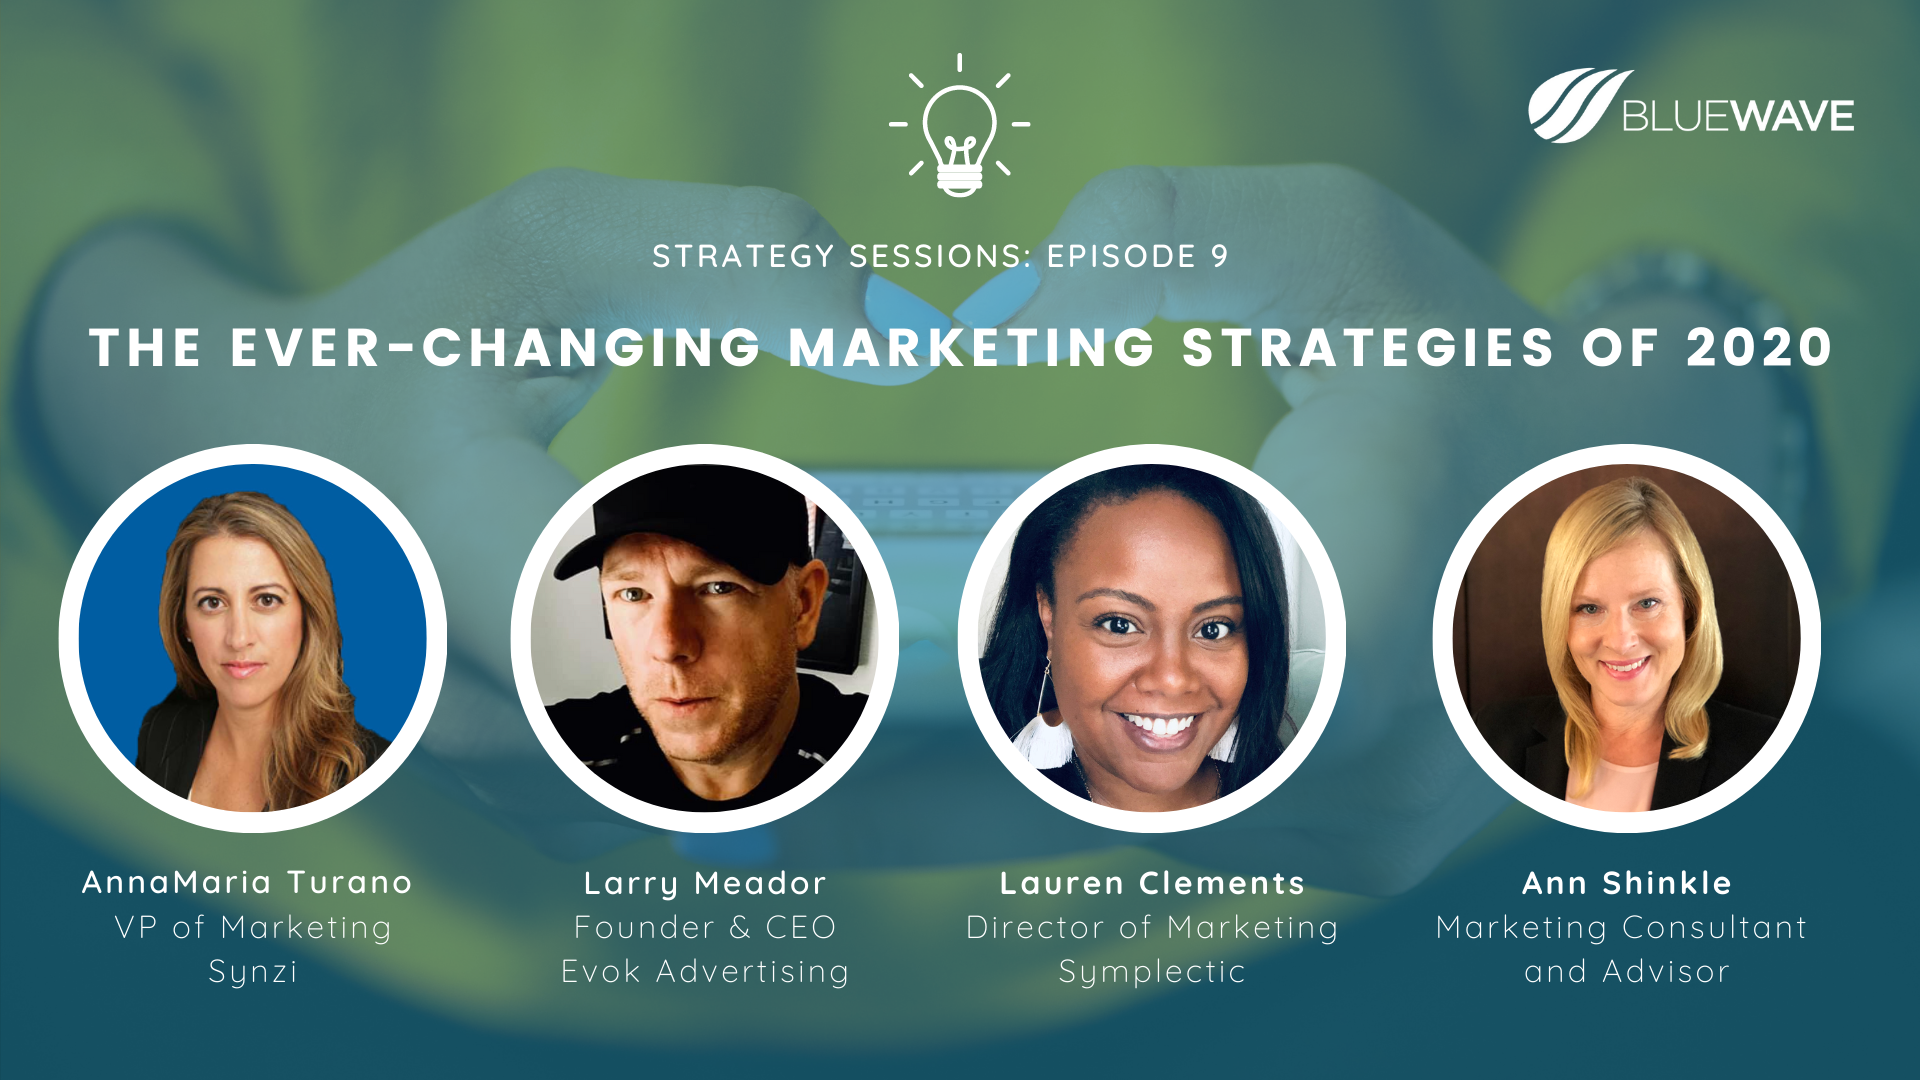 Ever-Changing Marketing Strategy Session Panelists